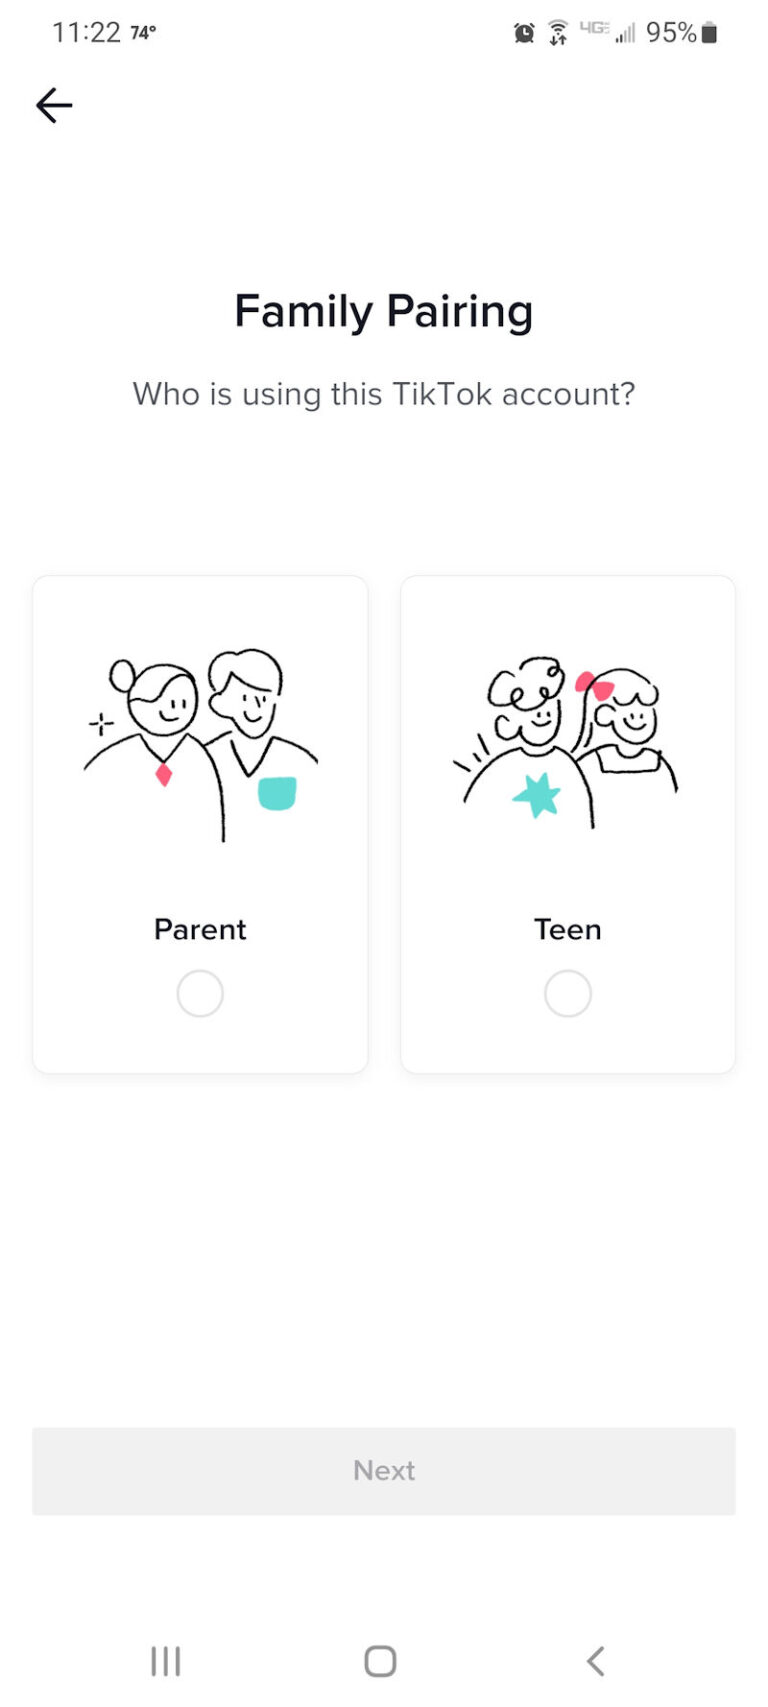 TikTok has a Family Pairing option that can limit what kids see.